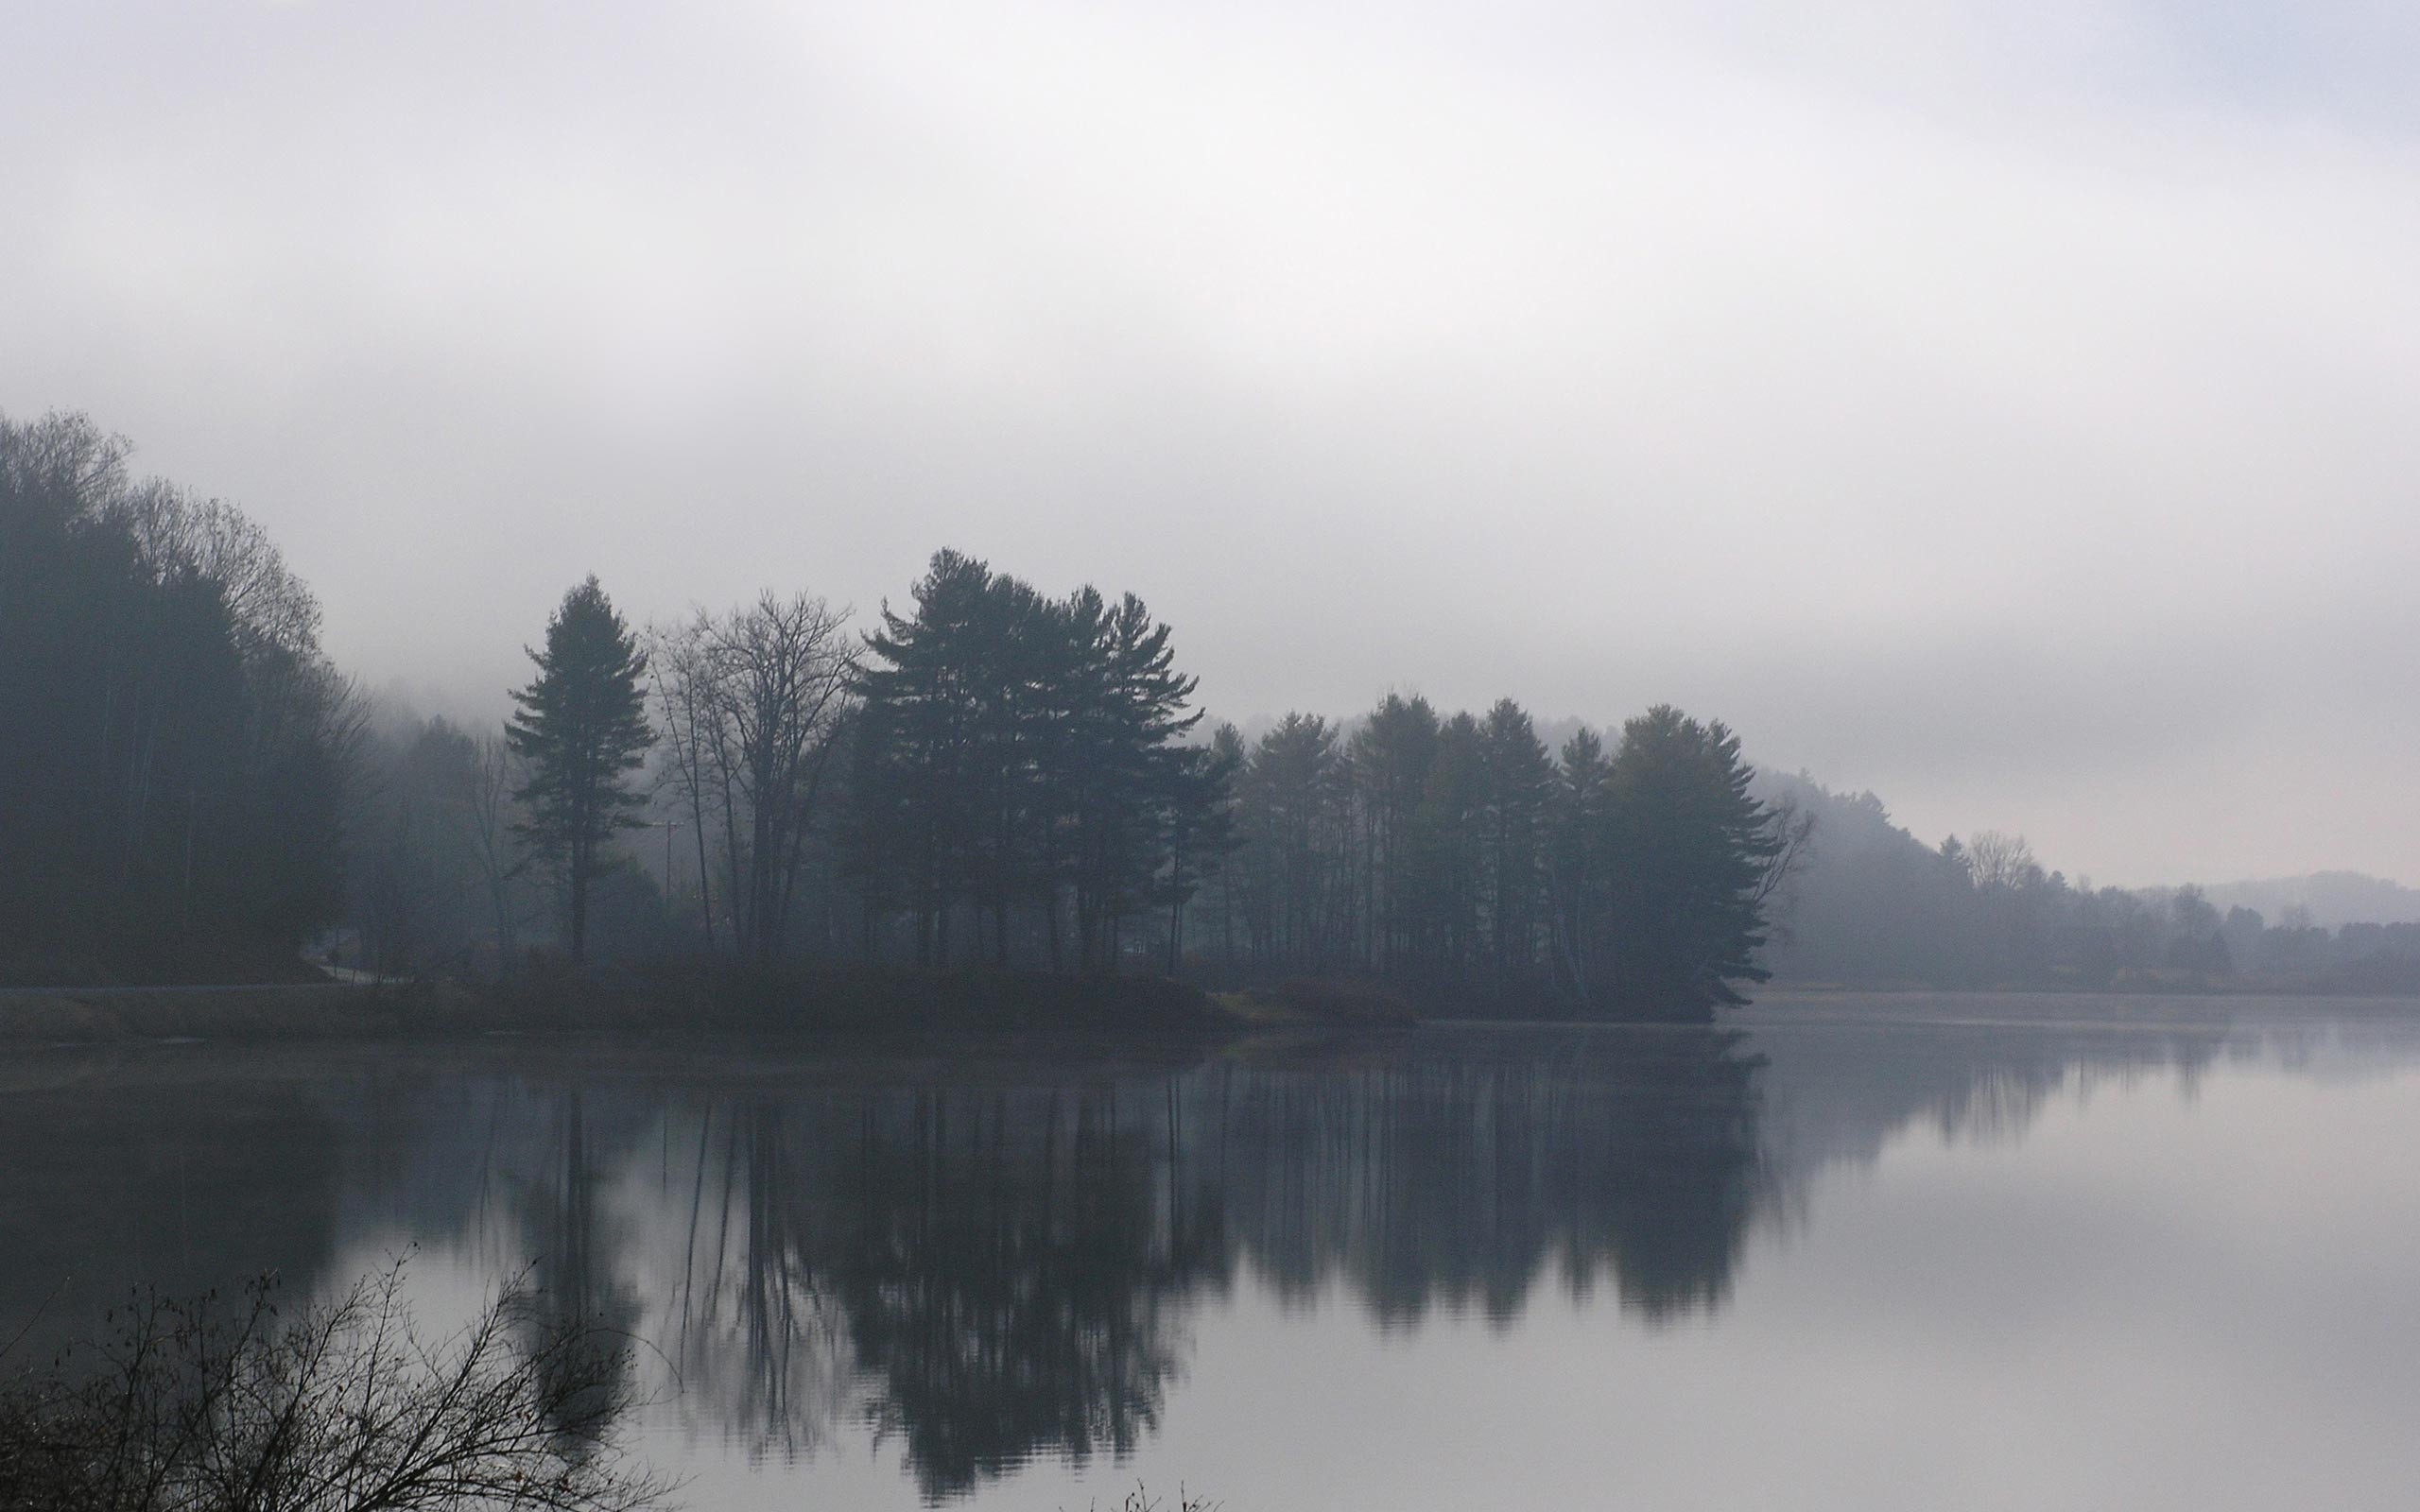 General 2560x1600 nature lake mist reflection overcast gloomy Connecticut calm waters